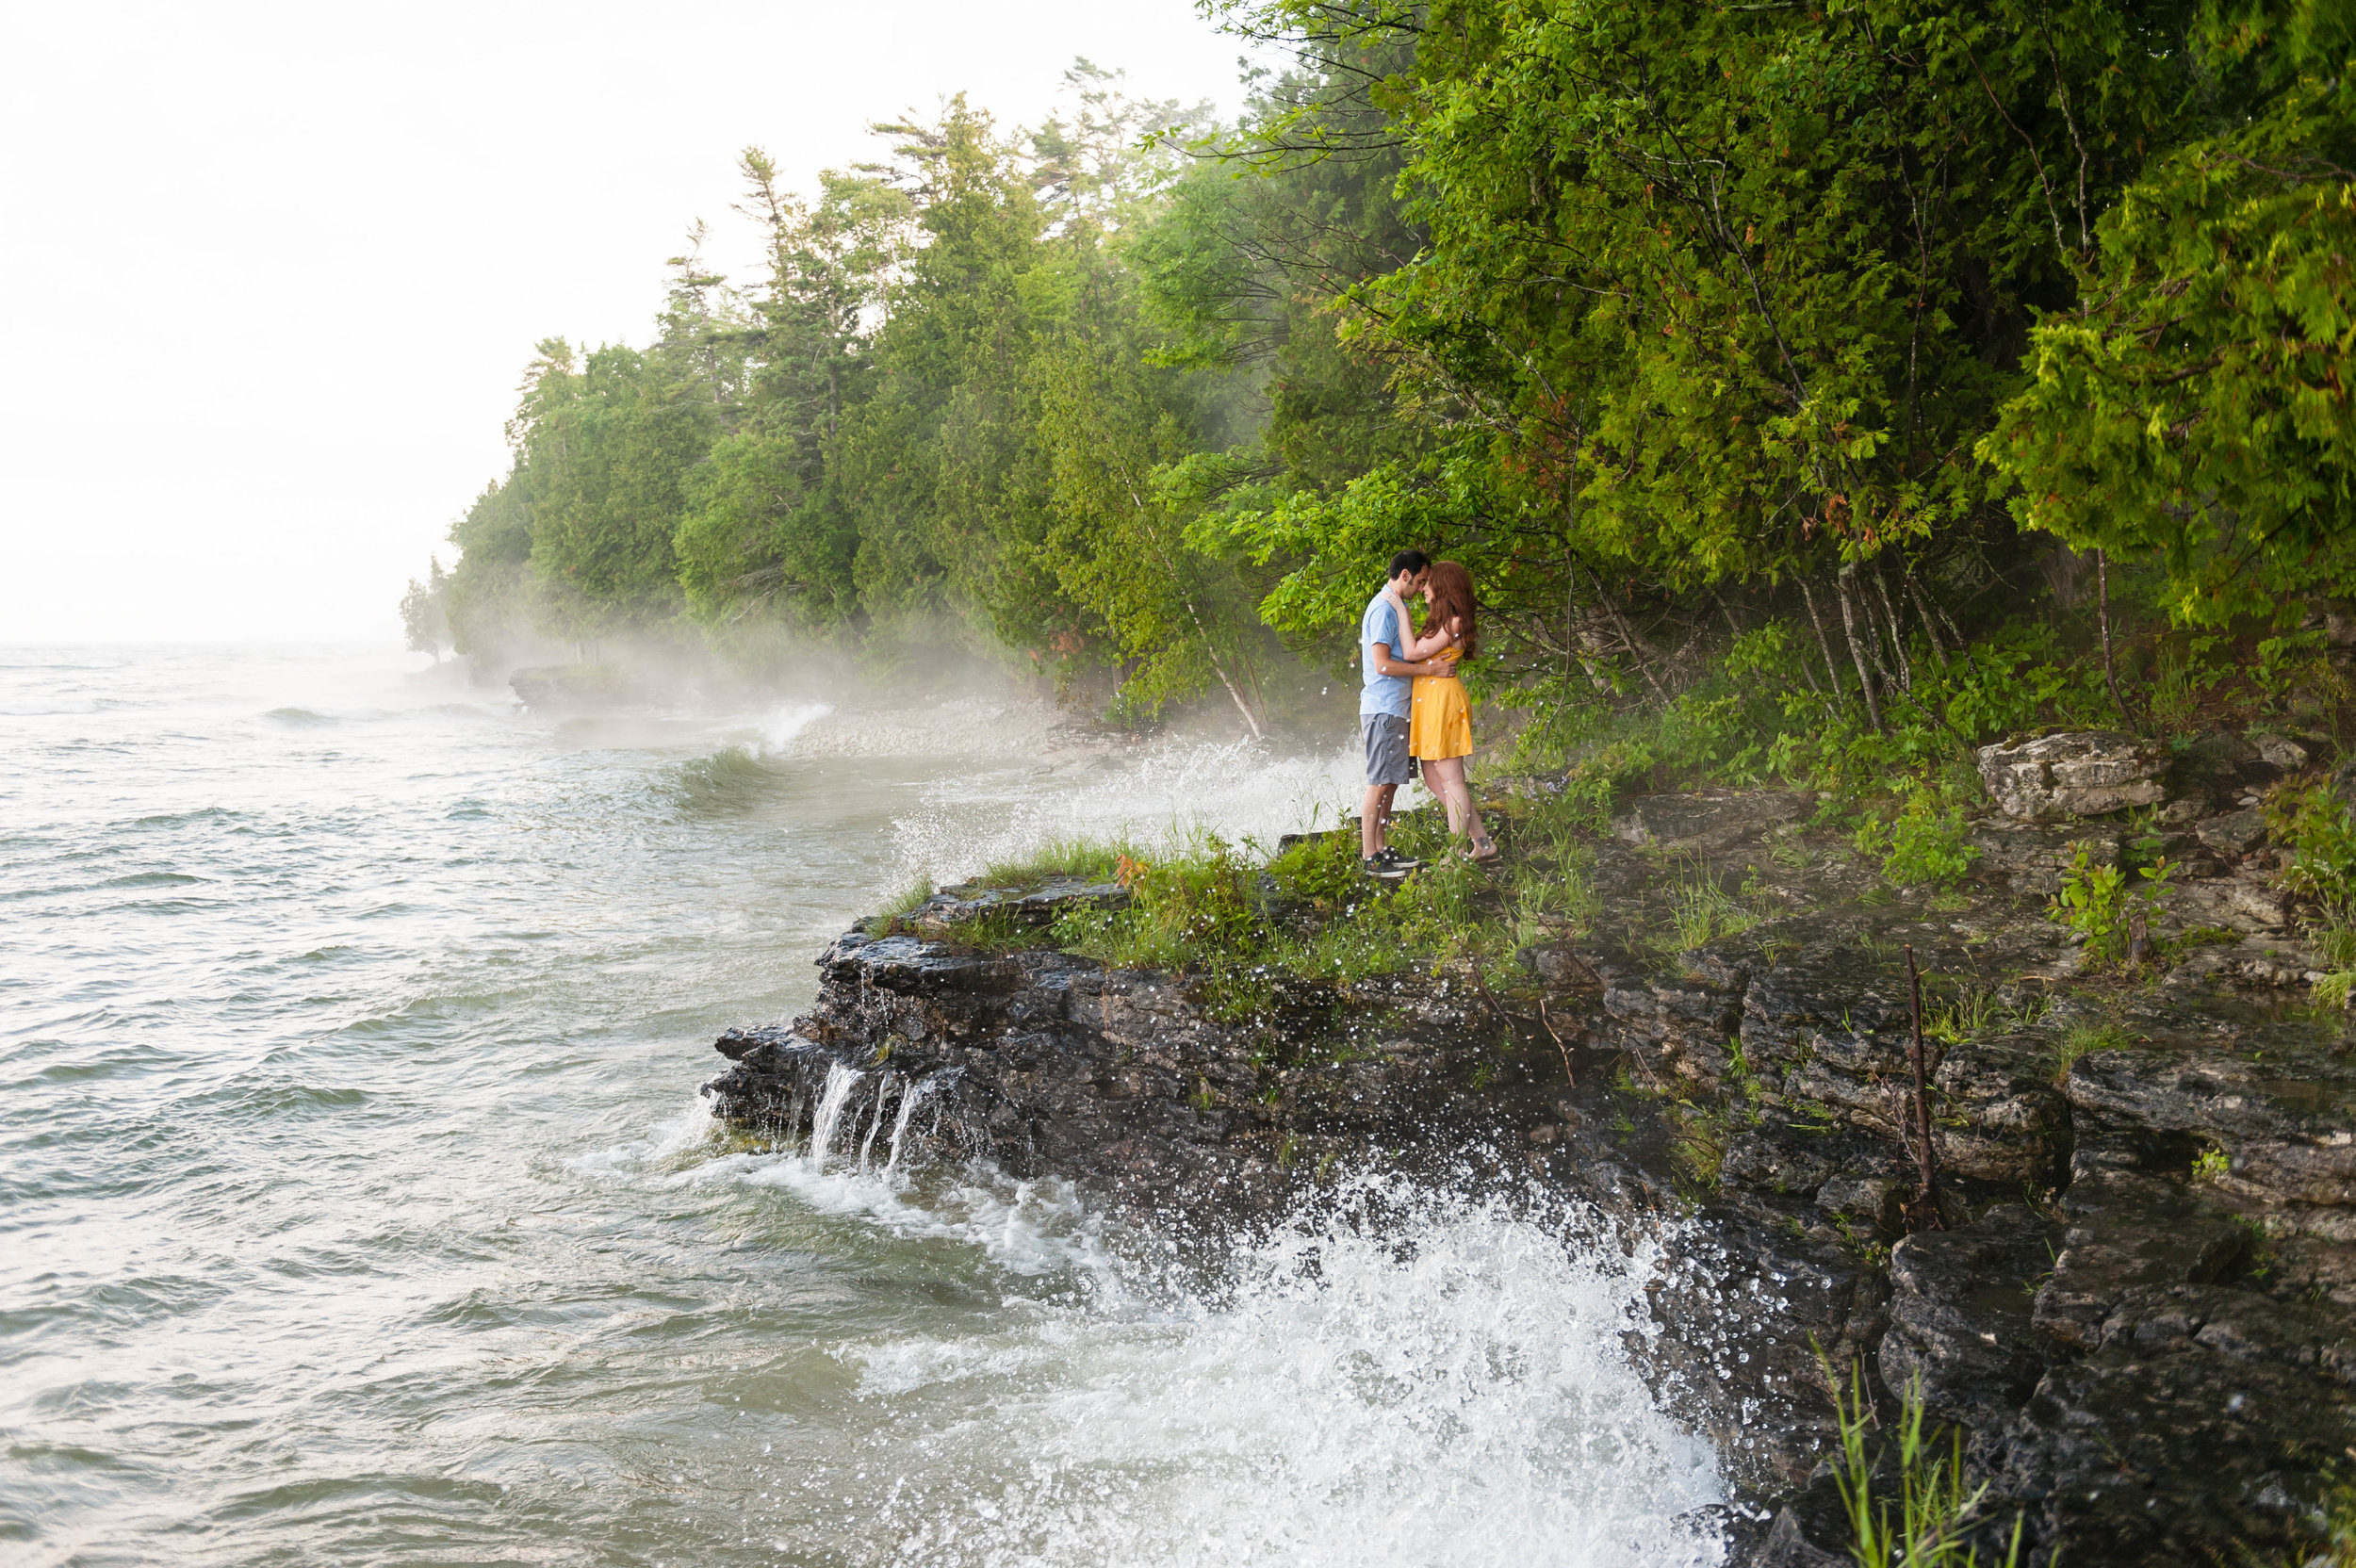 Romantic natural summer engagement session door county wisconsin